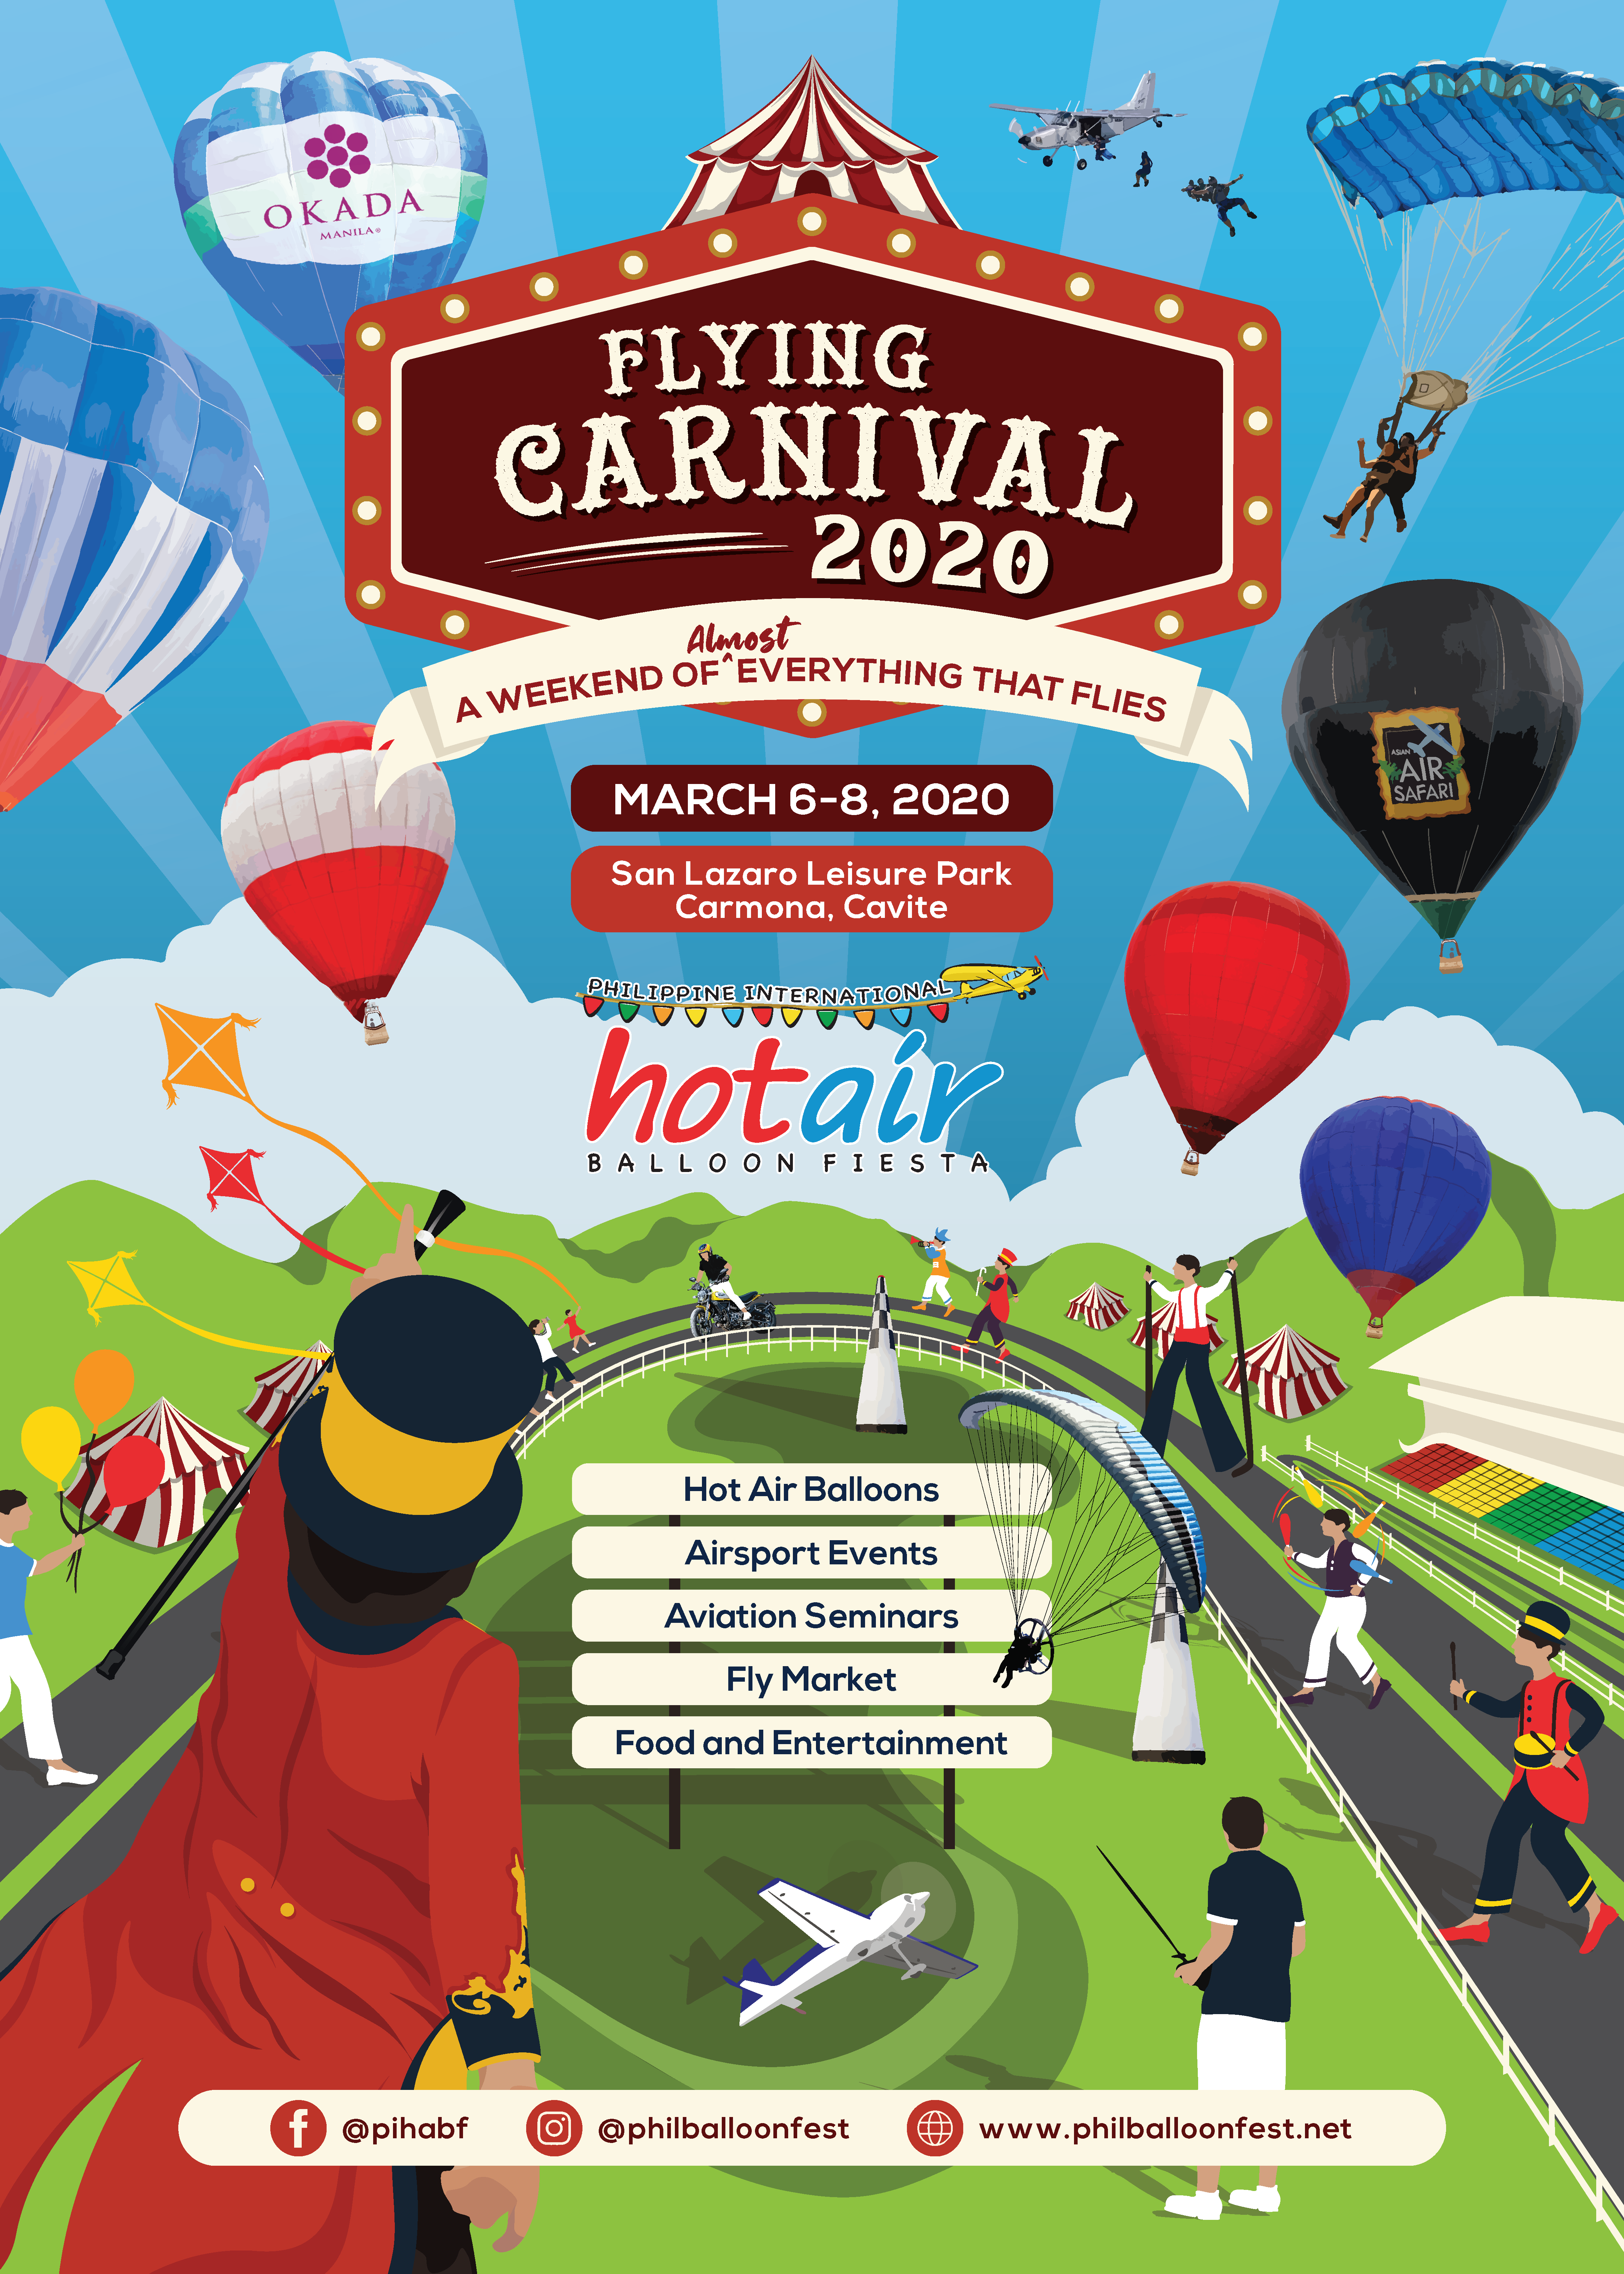 Witness The Flying Carnival 2020 in Carmona, Cavite this March!